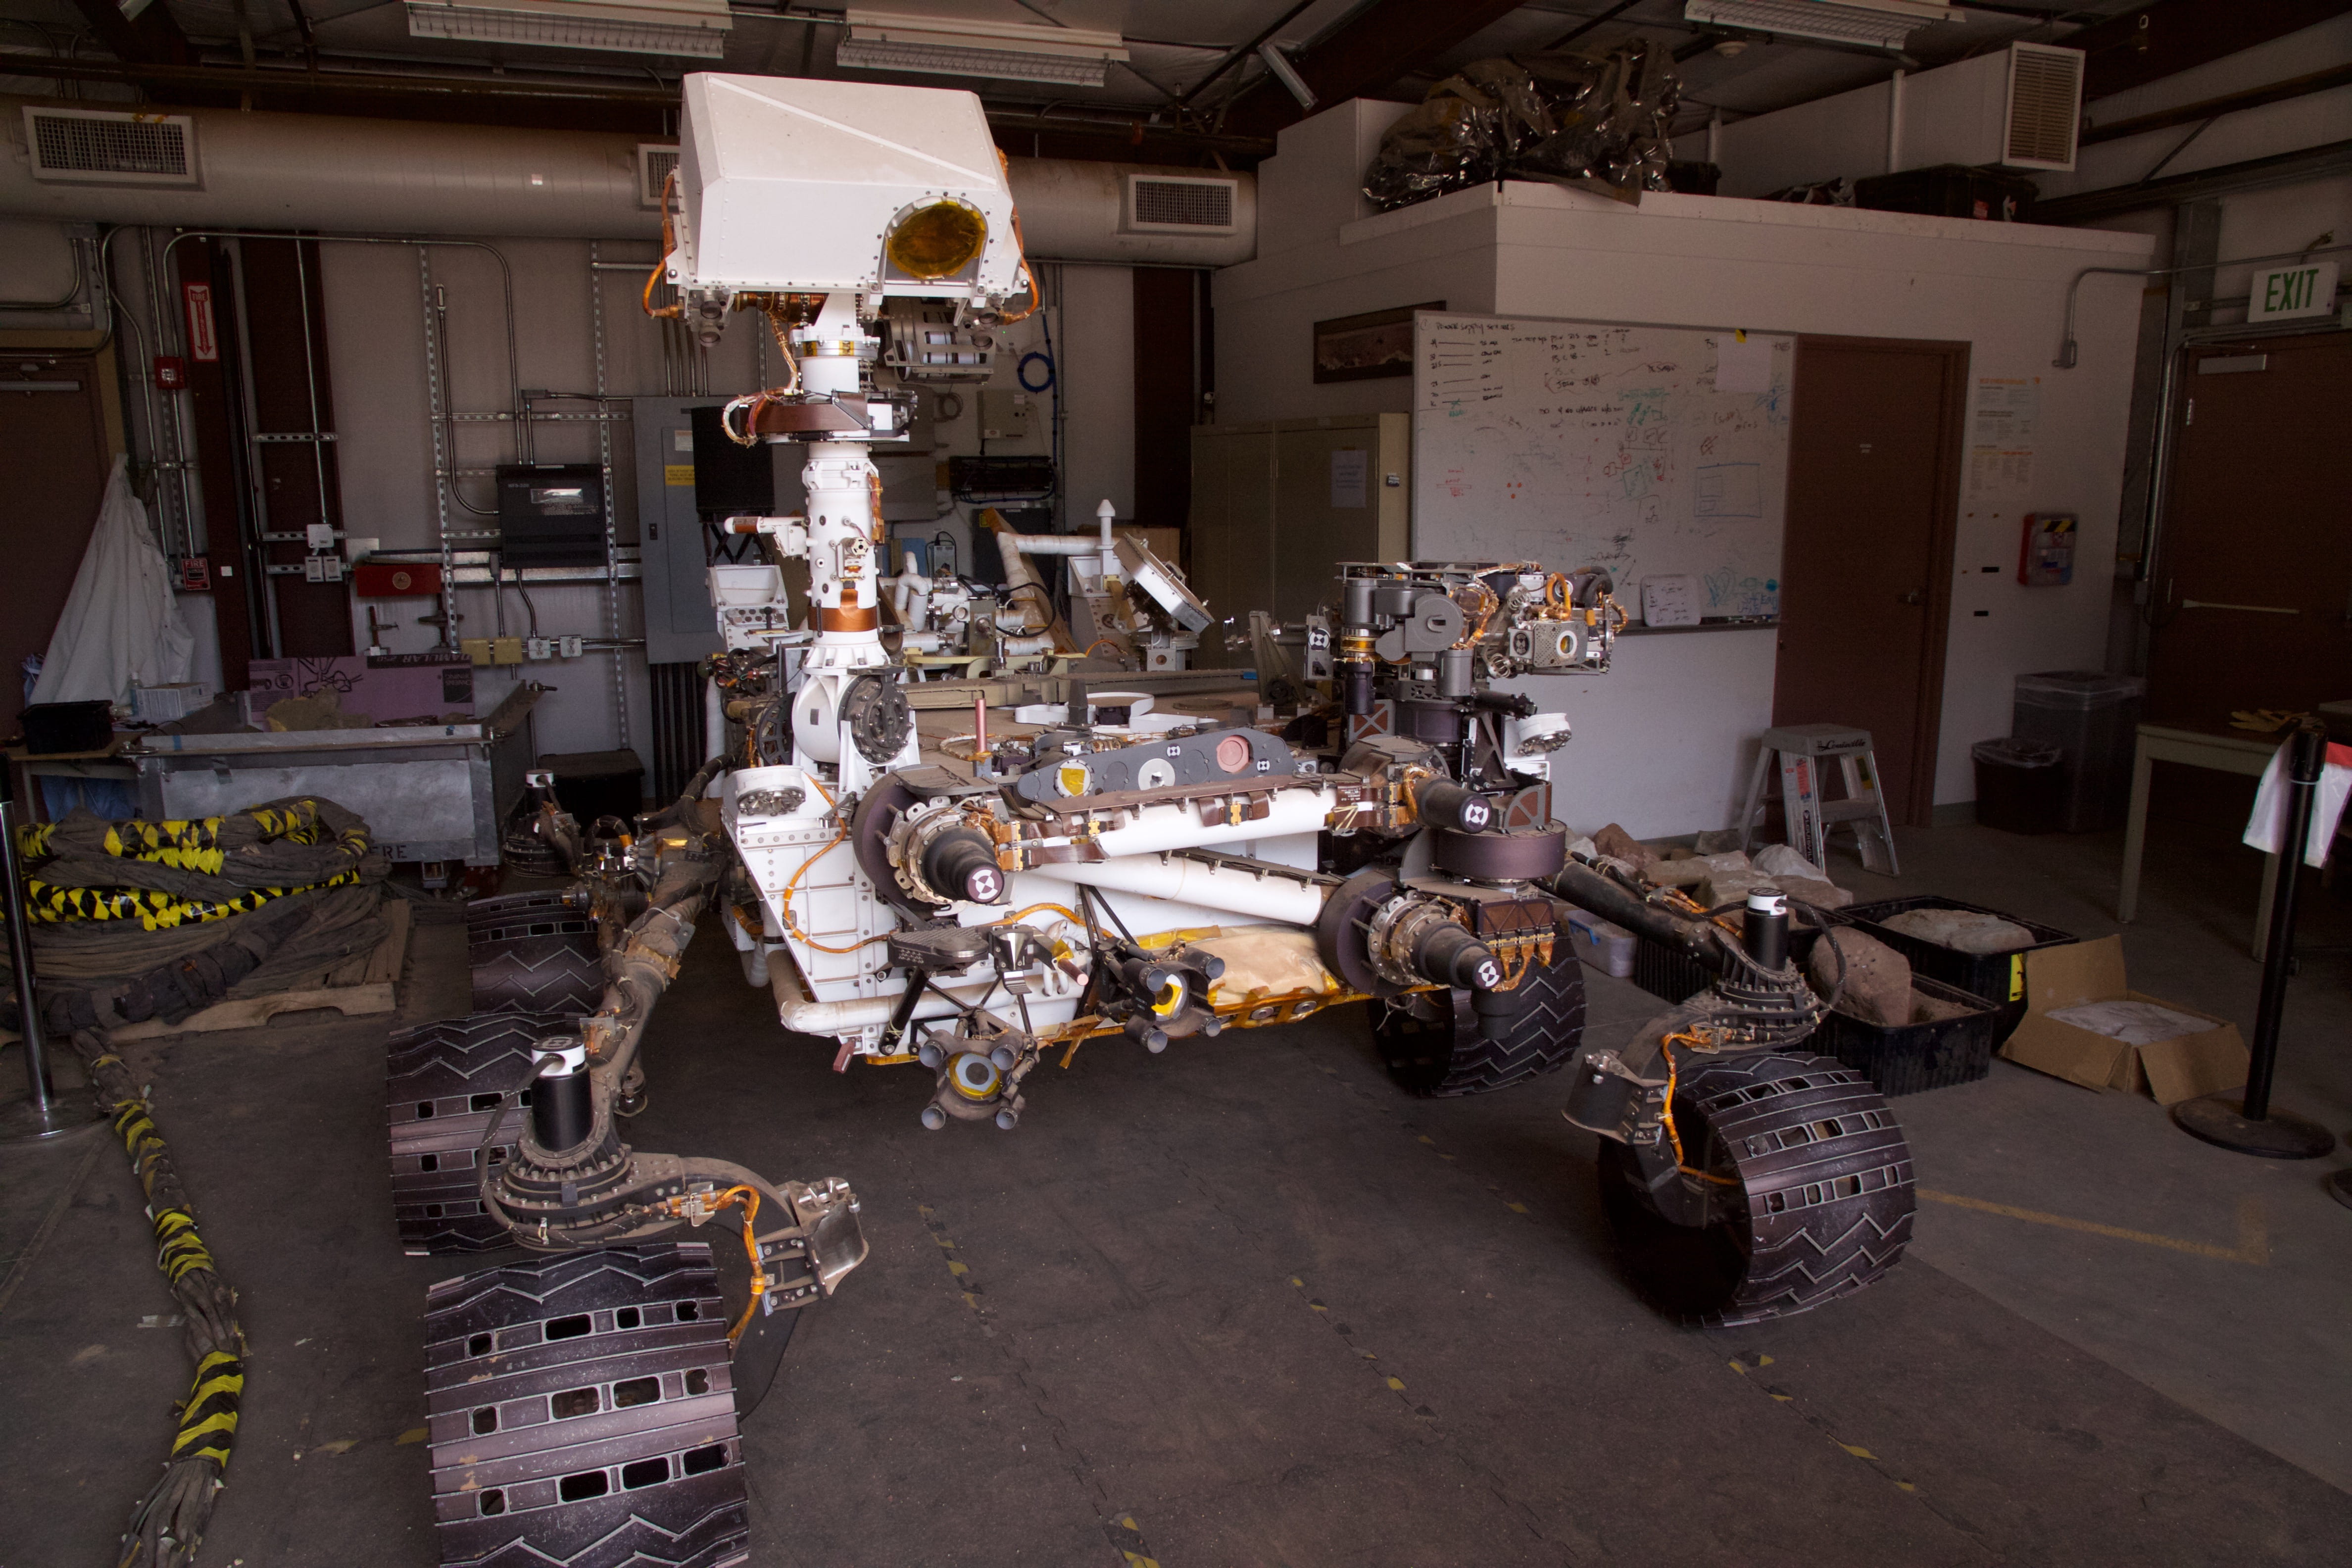 An exact copy of the rover currently on Mars is housed at the Jet Propulsion Laboratory (JPL, associated with Caltech). We got a tour of the facilities and saw the rover as part of our program at Caltech.